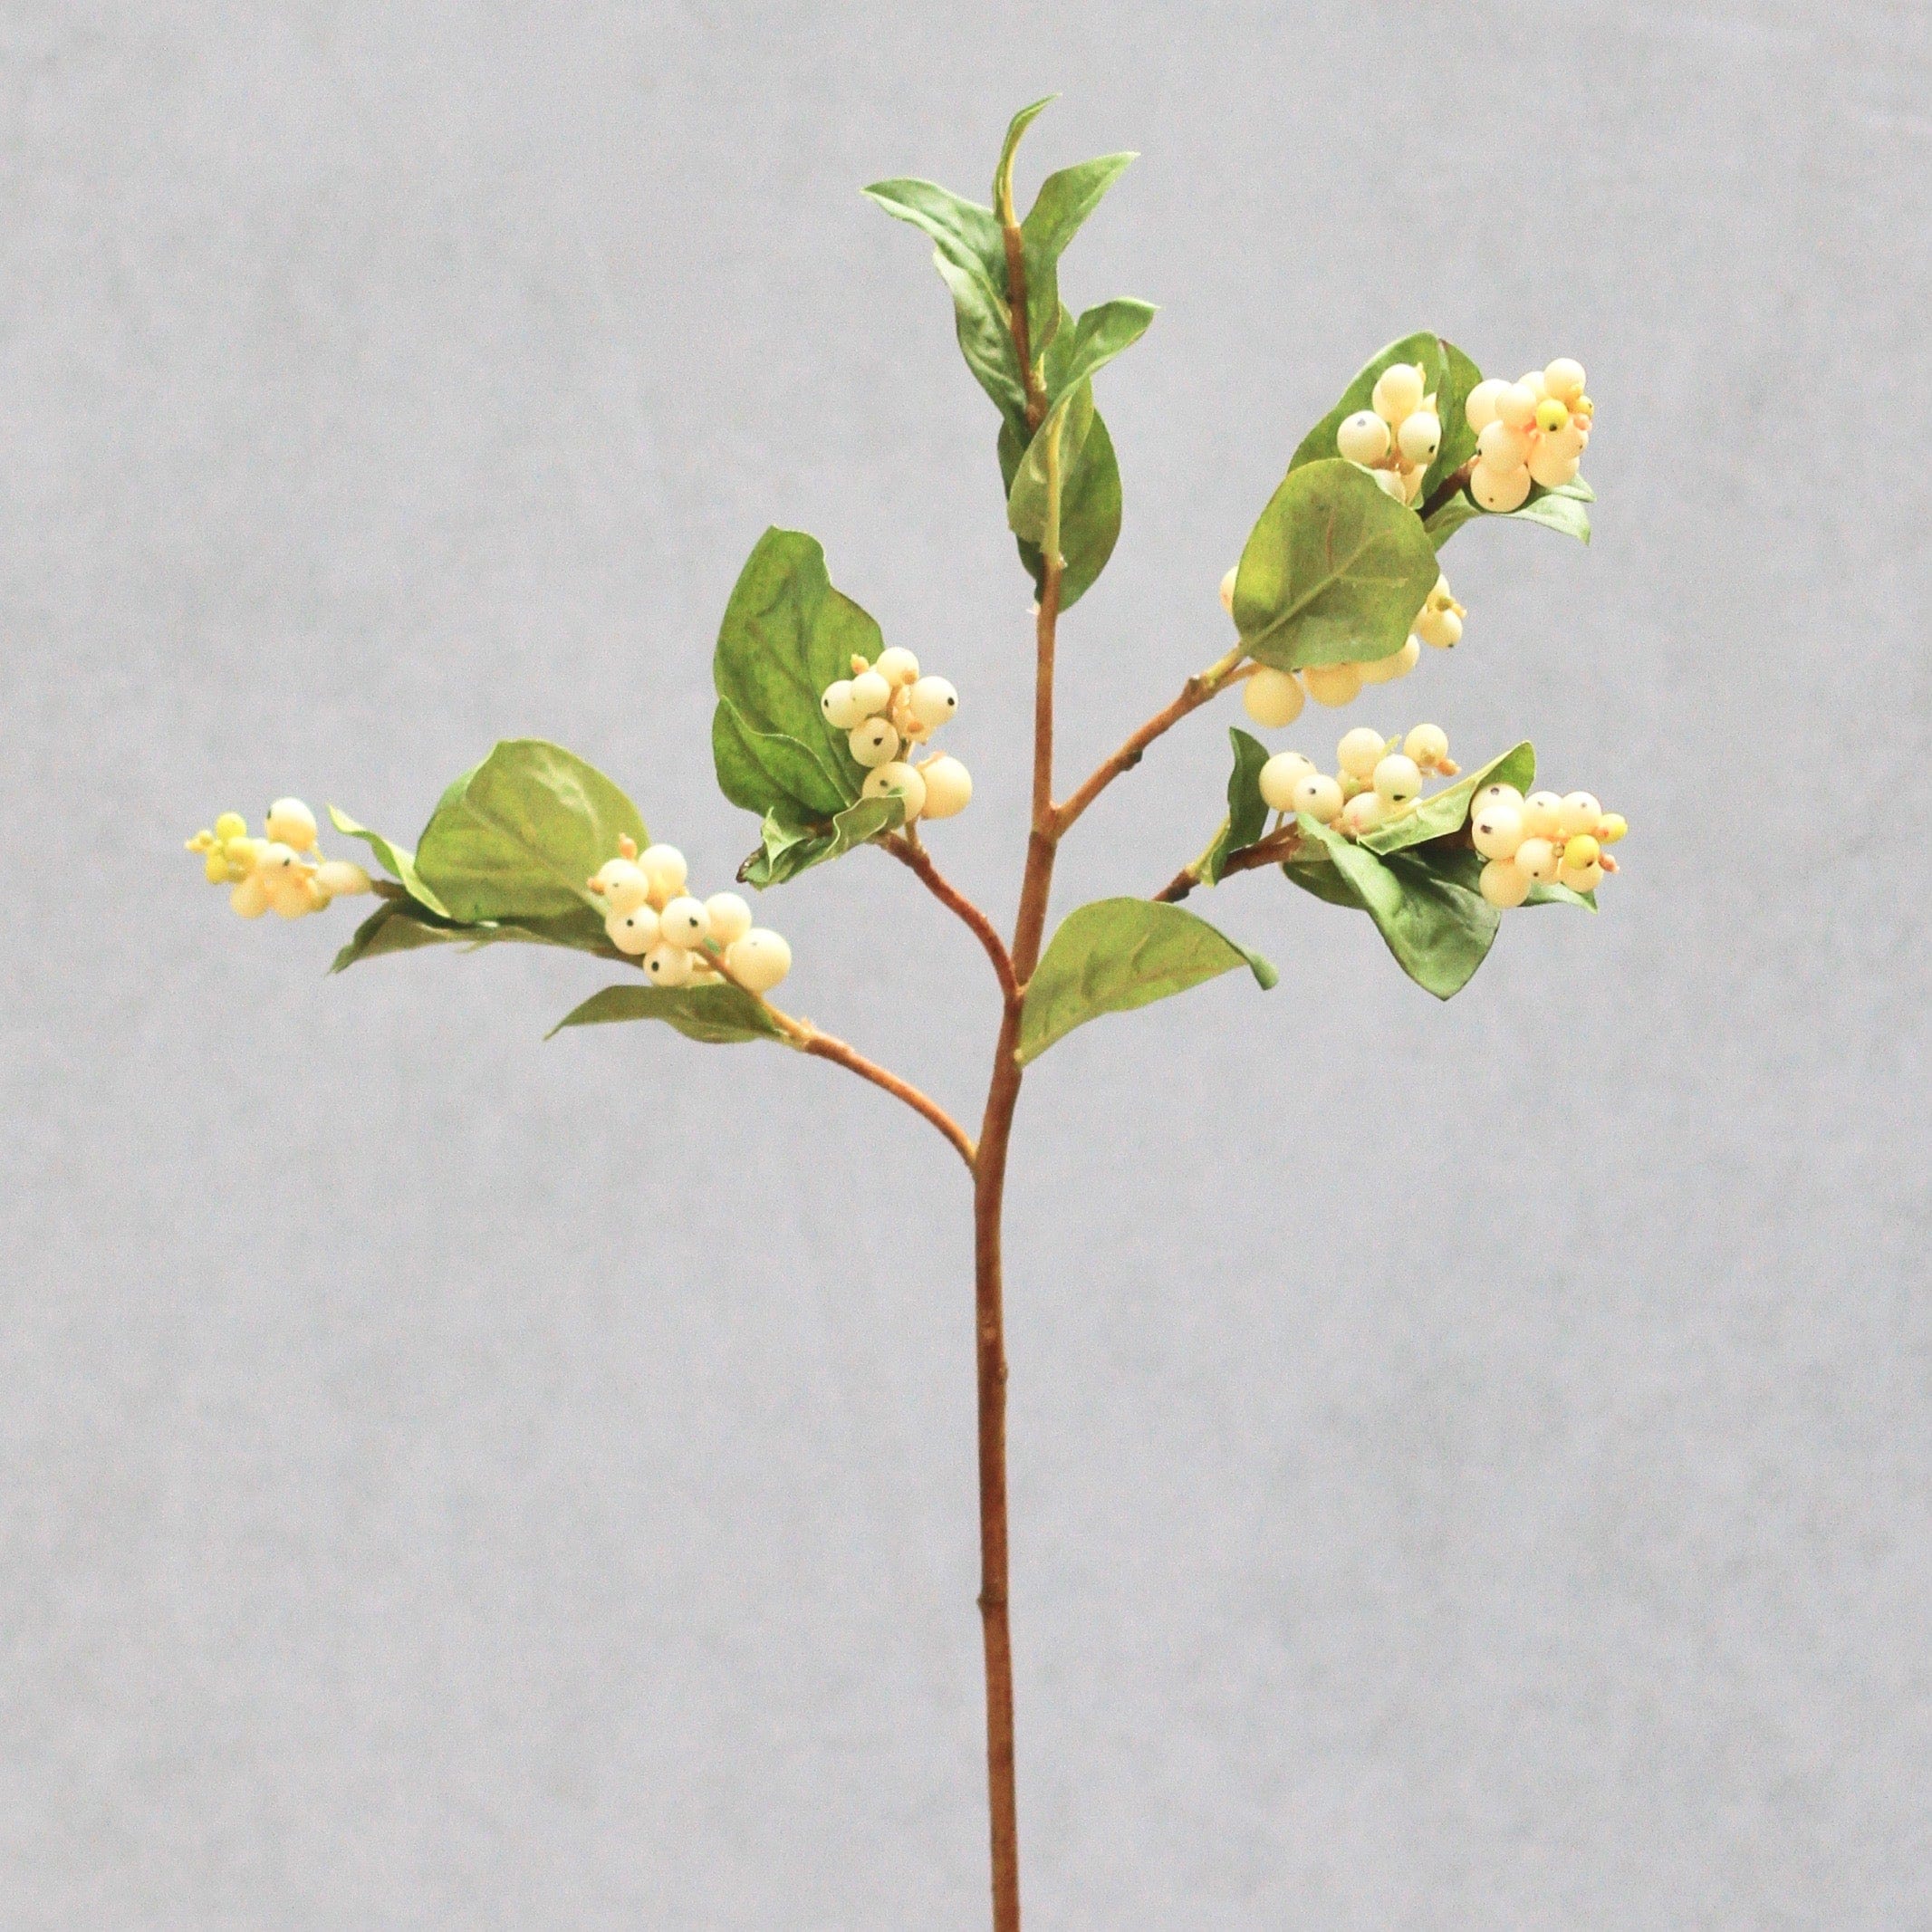 Artificial flowers luxury faux silk snowberry branch lifelike realistic faux flowers buy online from Amaranthine Blooms UK